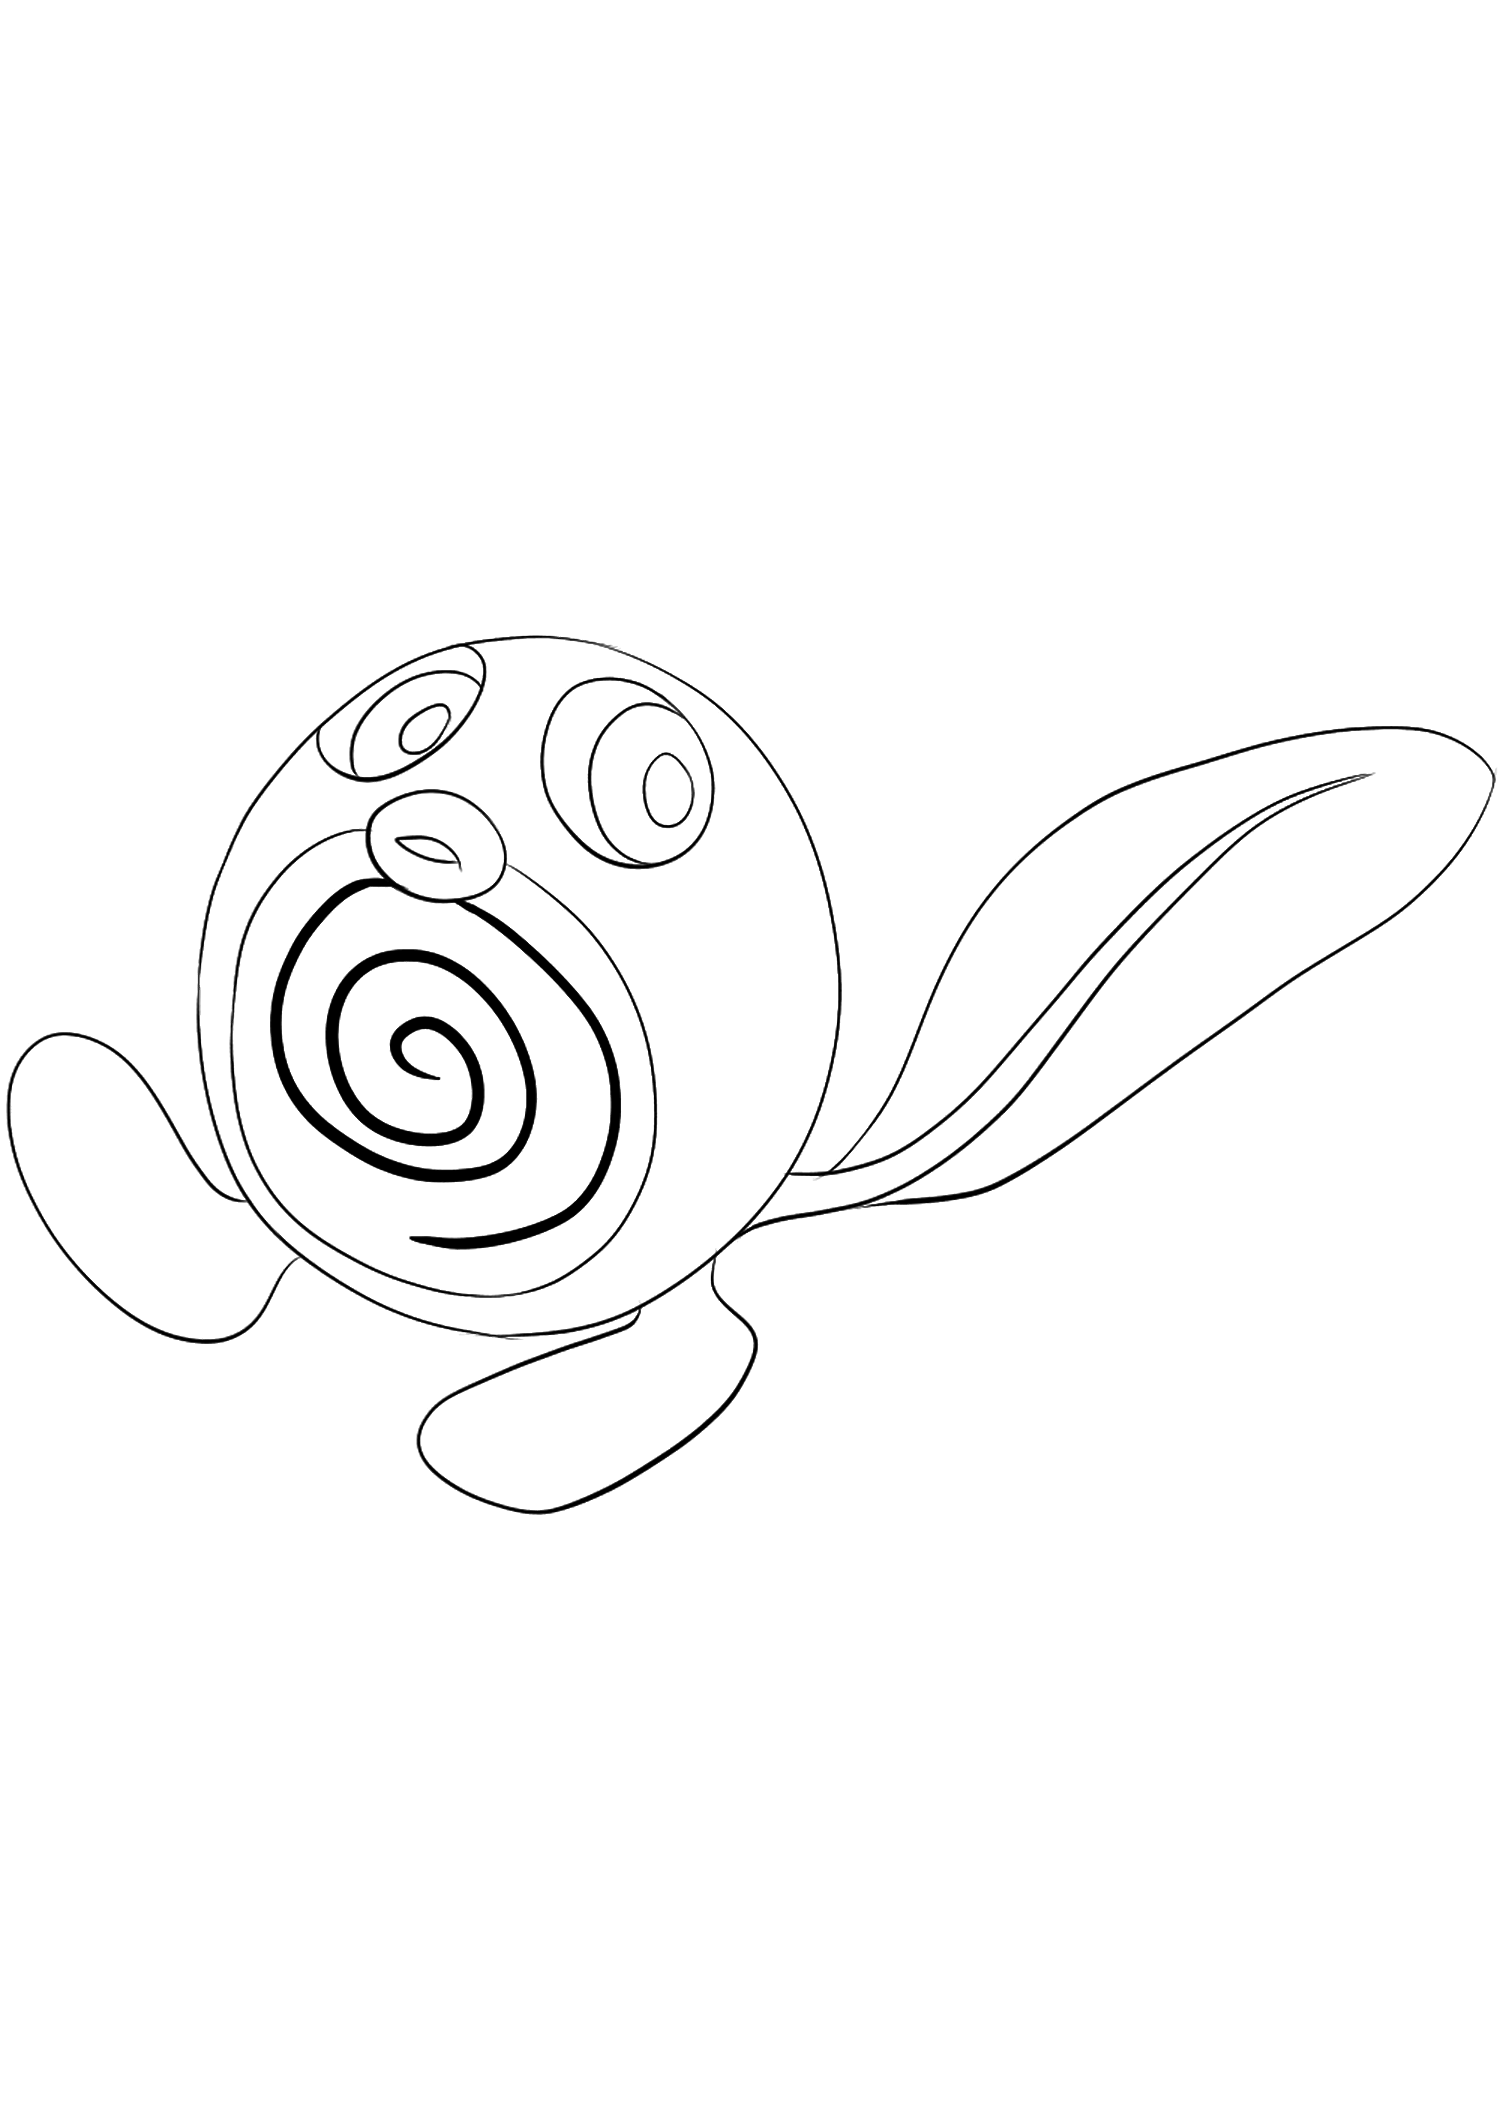 Poliwag (No.60). Poliwag Coloring page, Generation I Pokemon of type WaterOriginal image credit: Pokemon linearts by Lilly Gerbil on Deviantart.Permission:  All rights reserved © Pokemon company and Ken Sugimori.